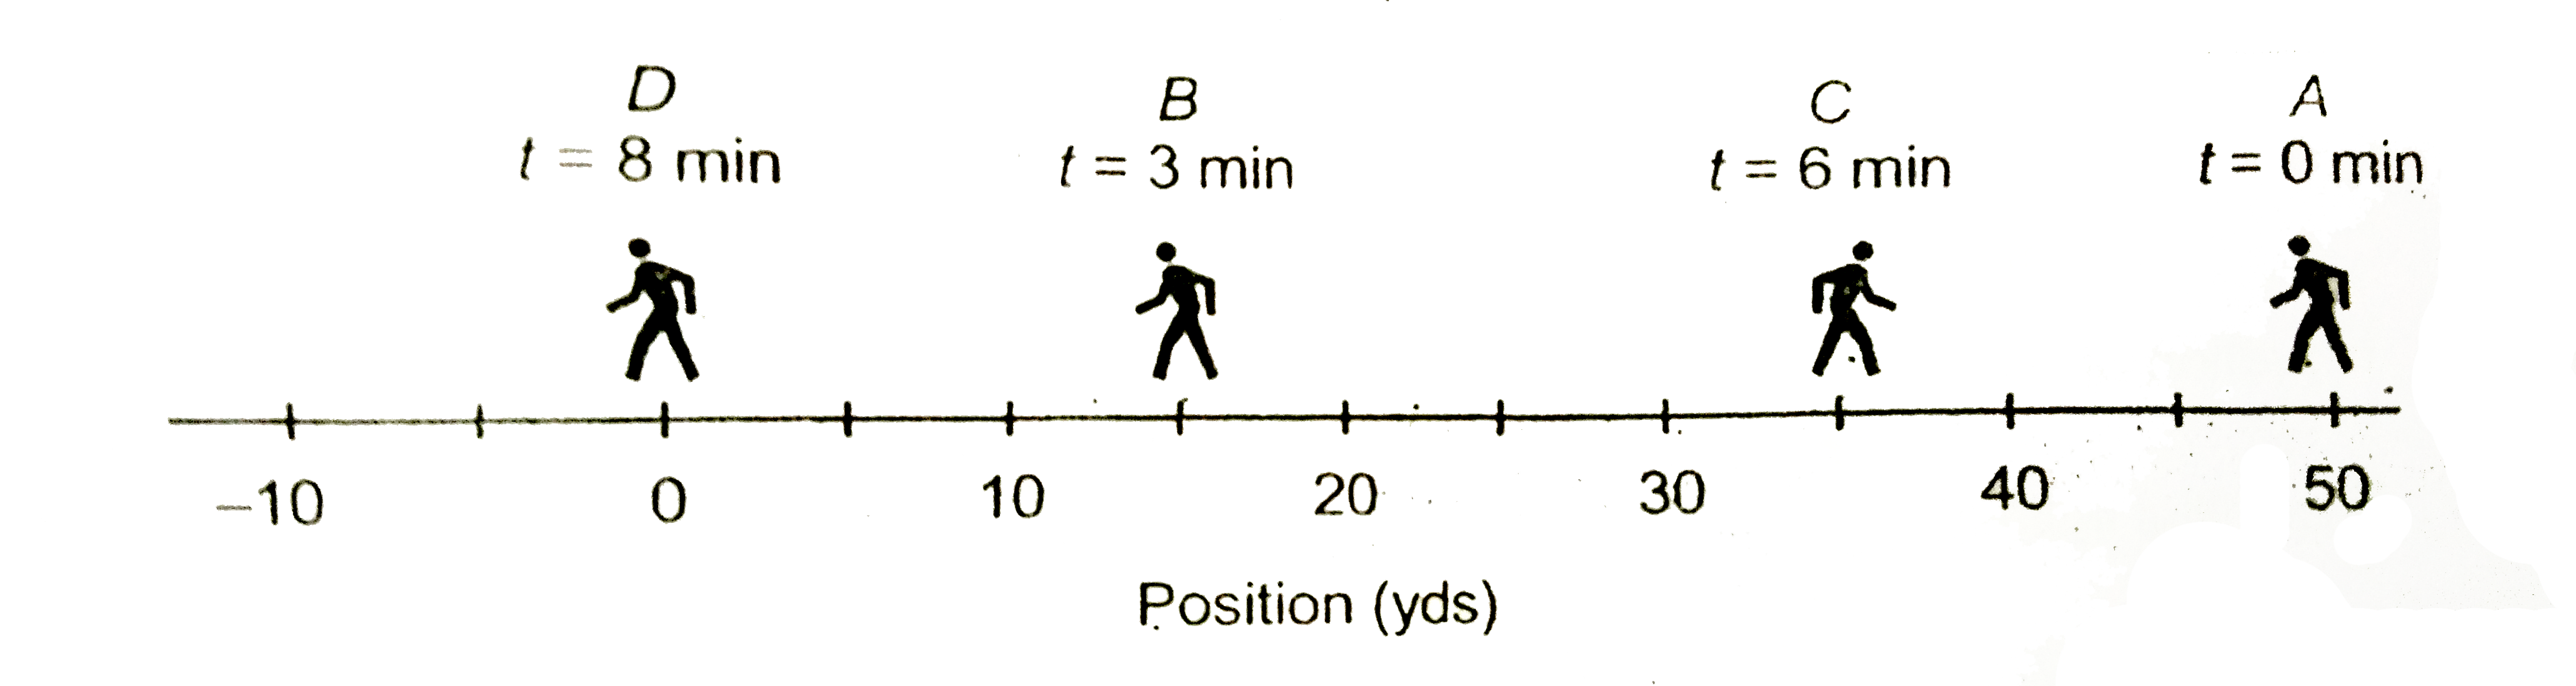 STATEMENT - 1 : The diagram below depicts the path of a person walking to and fro from position A to B to C to D. The distance for this motion is 100 yds.   STATEMENT - 2 : For the same diagram below, the displacement is 50 yds      STATEMENT - 3 : Position-time graphs cannot be used to represent the motion of object with accelerated motion.